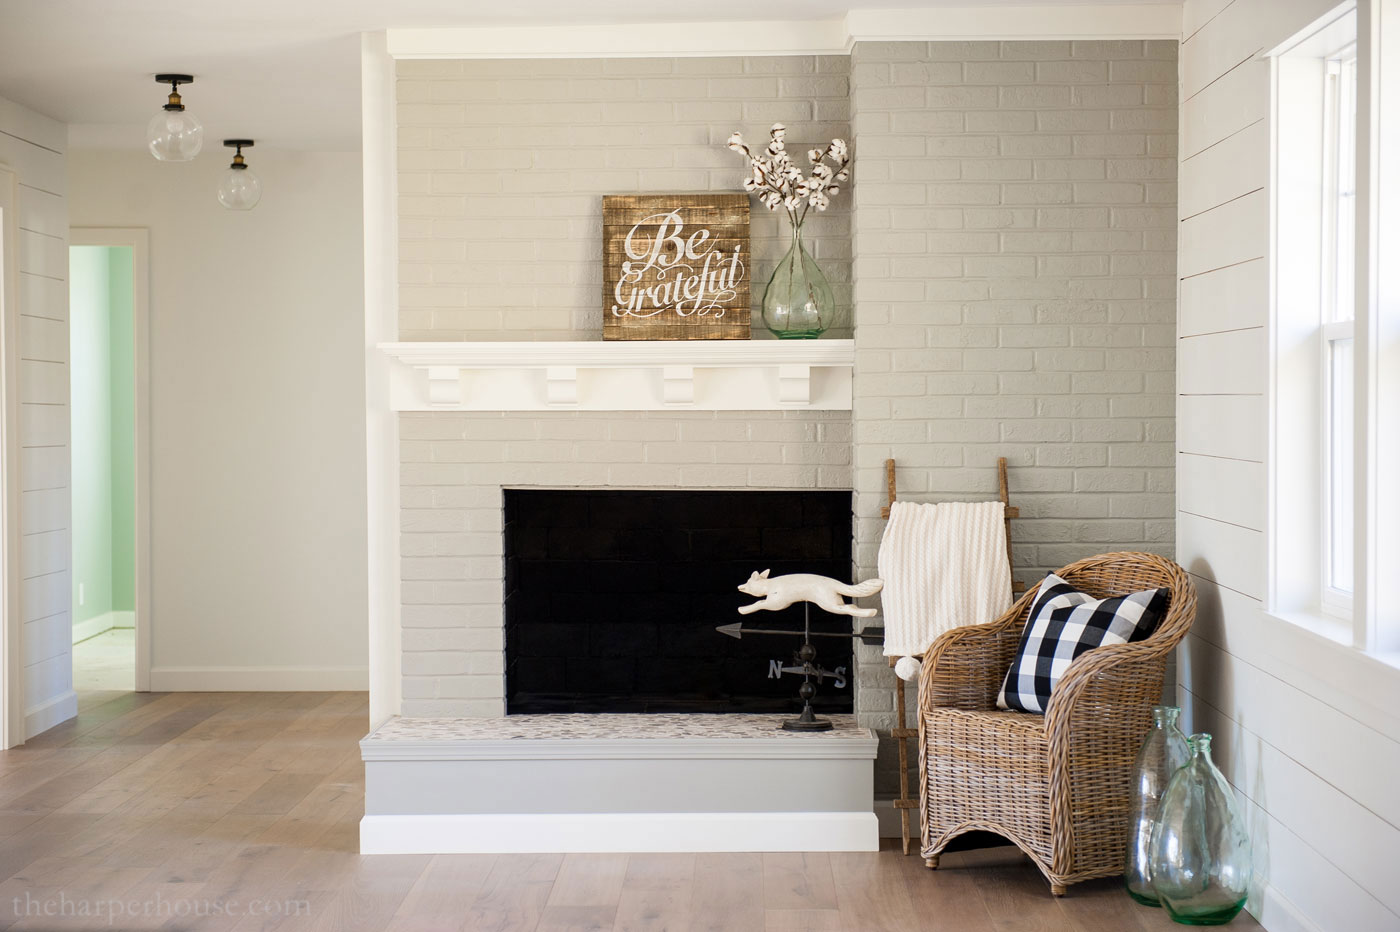 How To Cover Brick Fireplace With Concrete